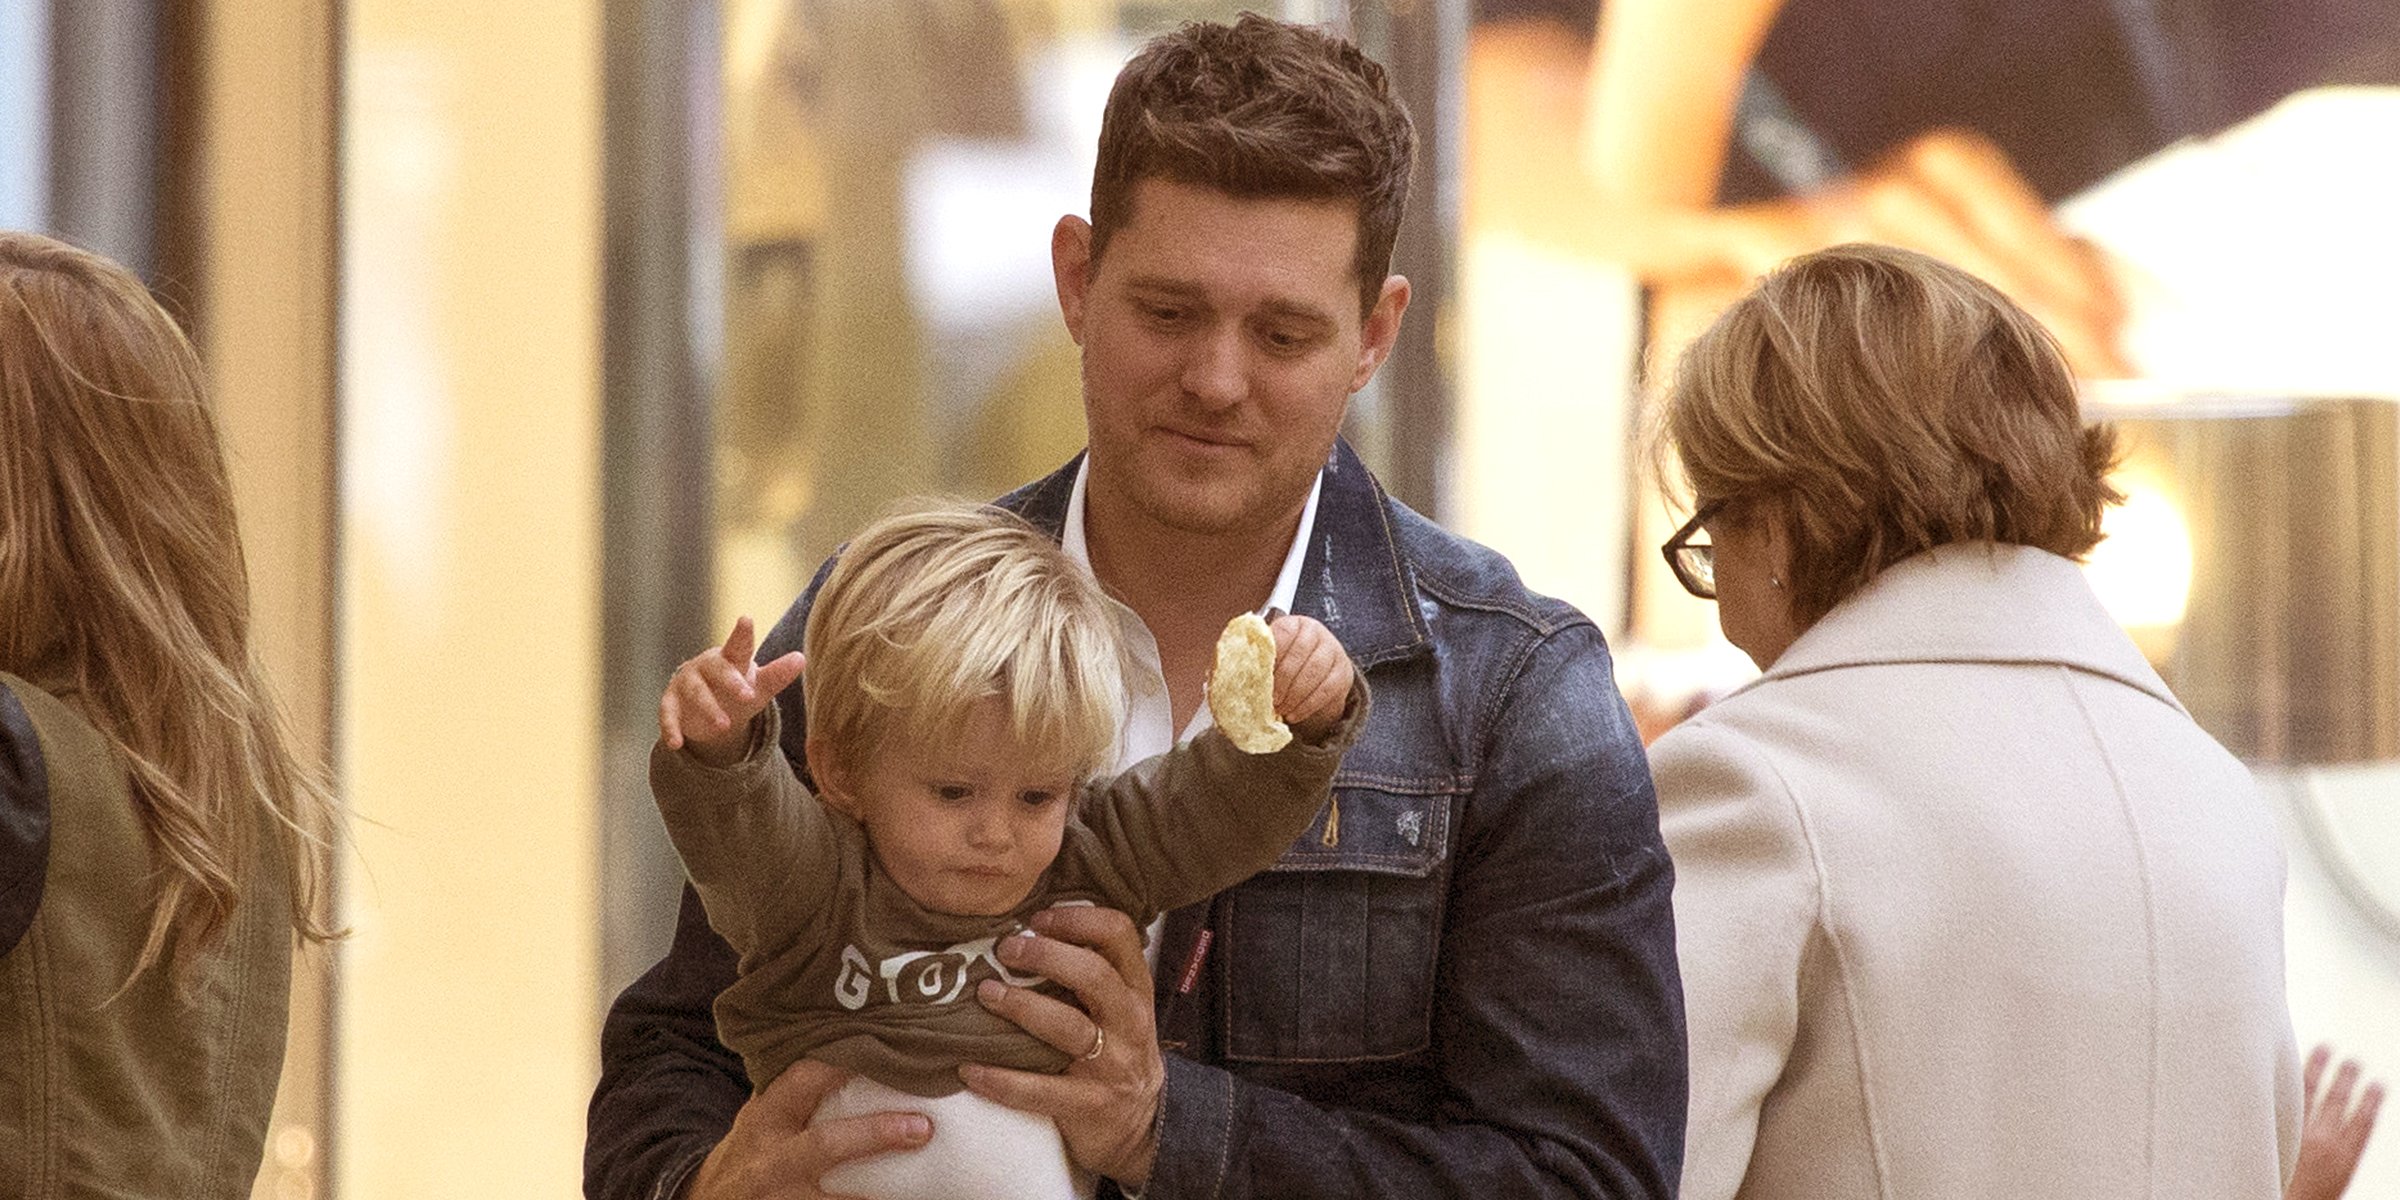 Michael Buble and Noah Buble | Source: Getty Images